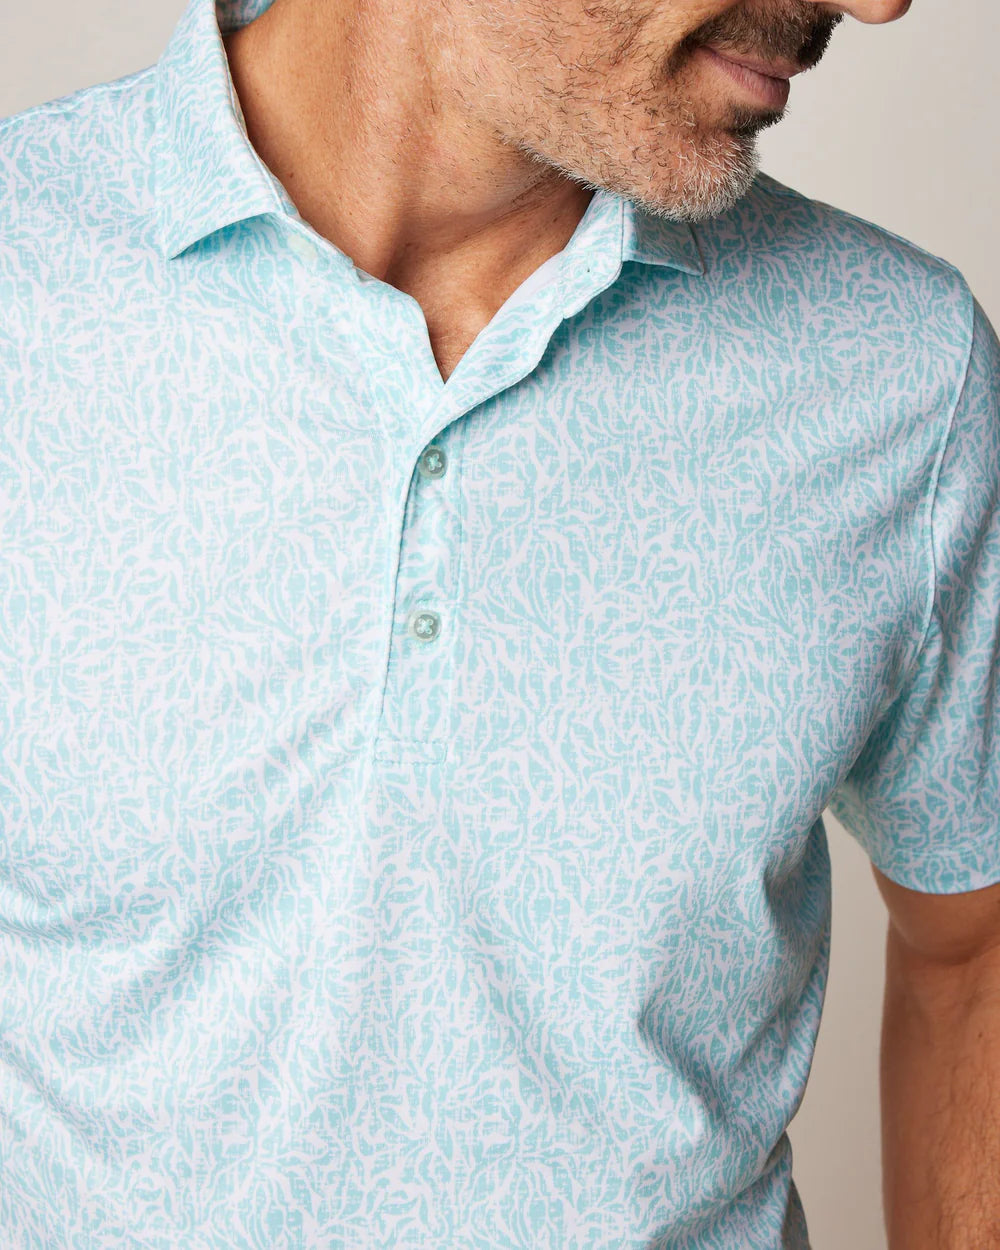 A sharp looking polo with a crisp&nbsp;floral print. Made in our signature performance jersey fabric, the Stines&nbsp;wicks away sweat and moves with you both on and off the course.